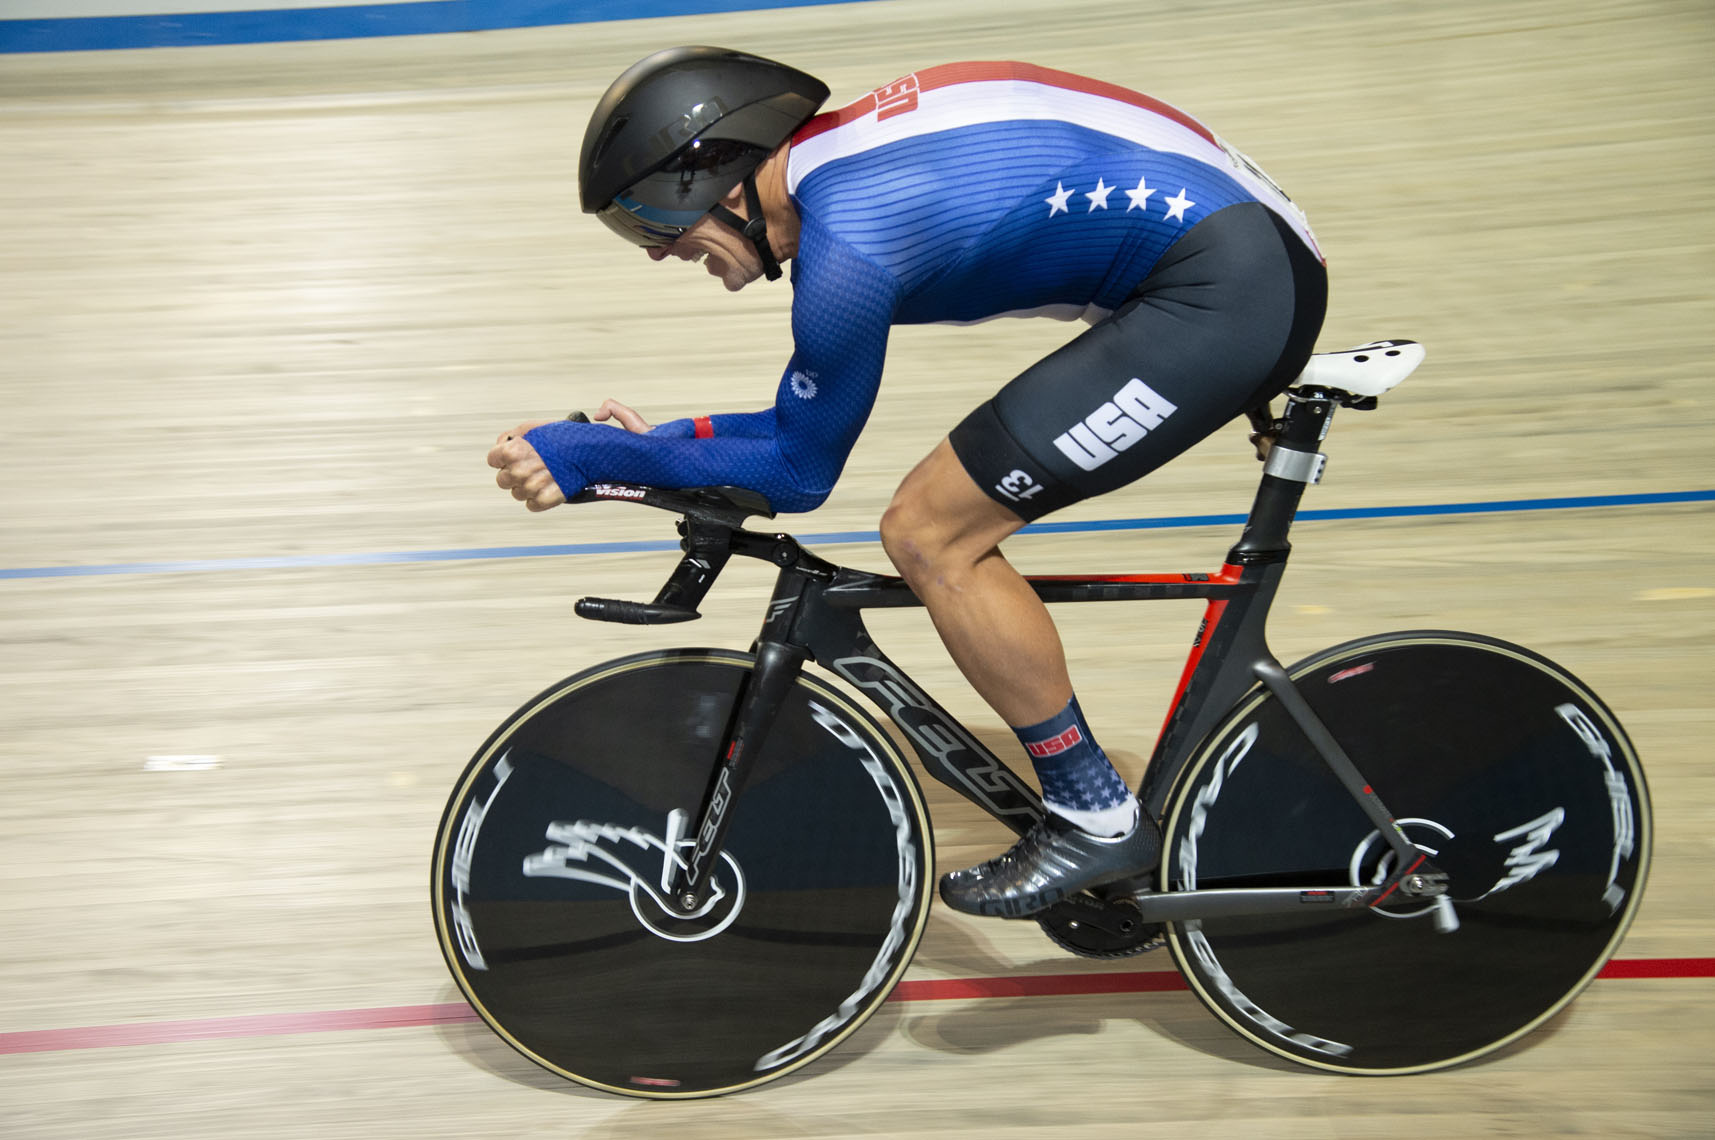 UCI Paracycling Track World Championships, Apeldoorn, Netherlands